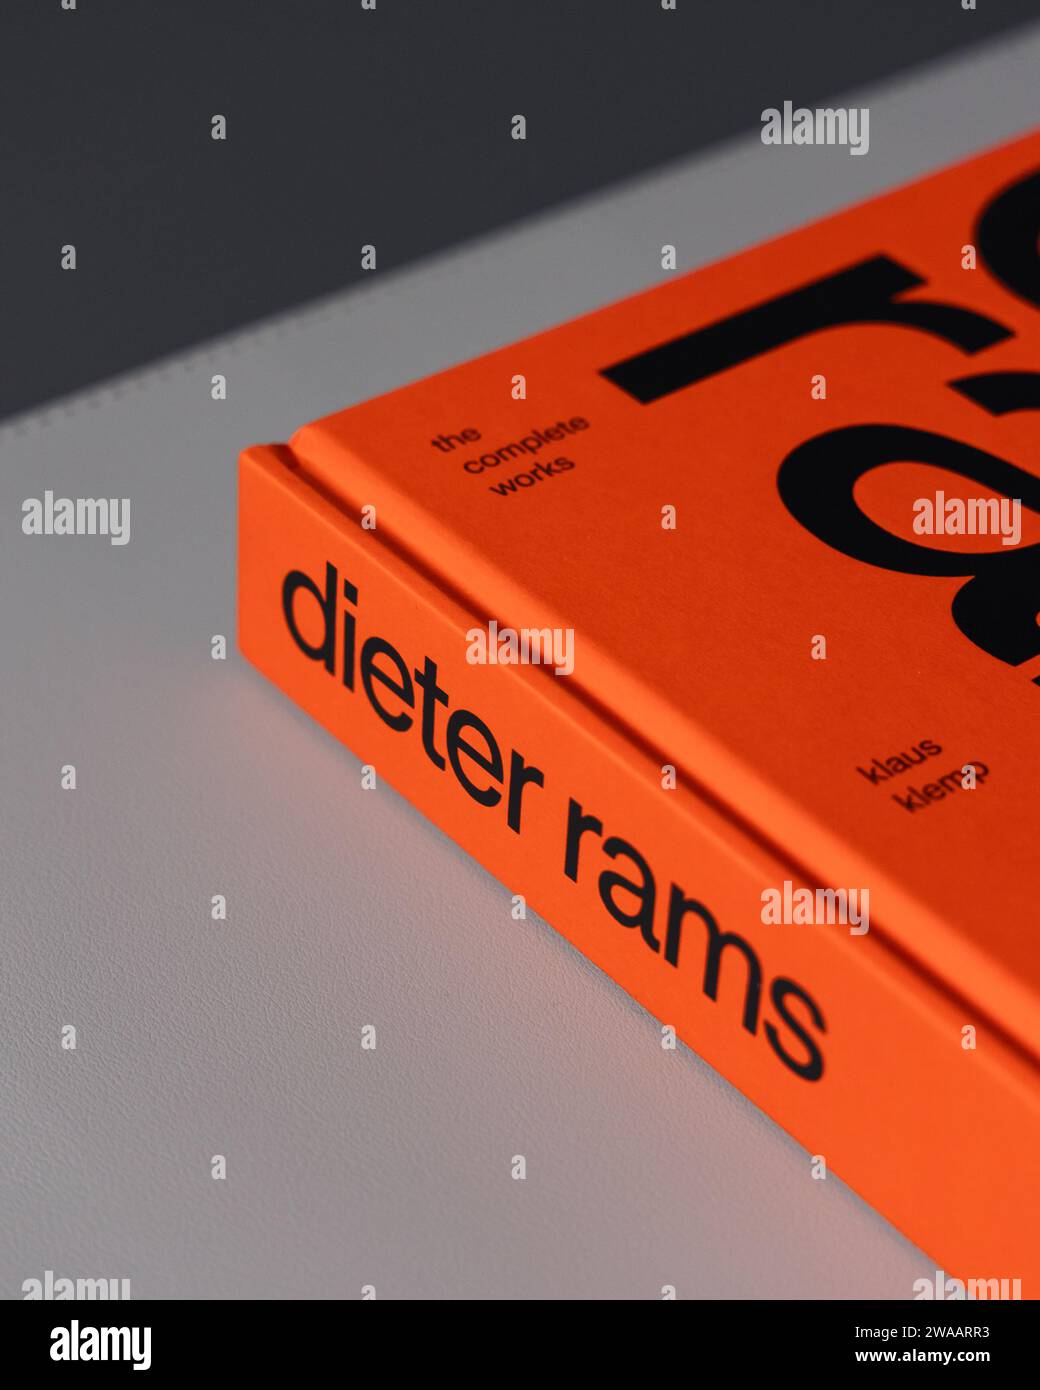 LONDON - DECEMBER 27, 2023: Dieter Rams product design book with bright orange cover Stock Photo